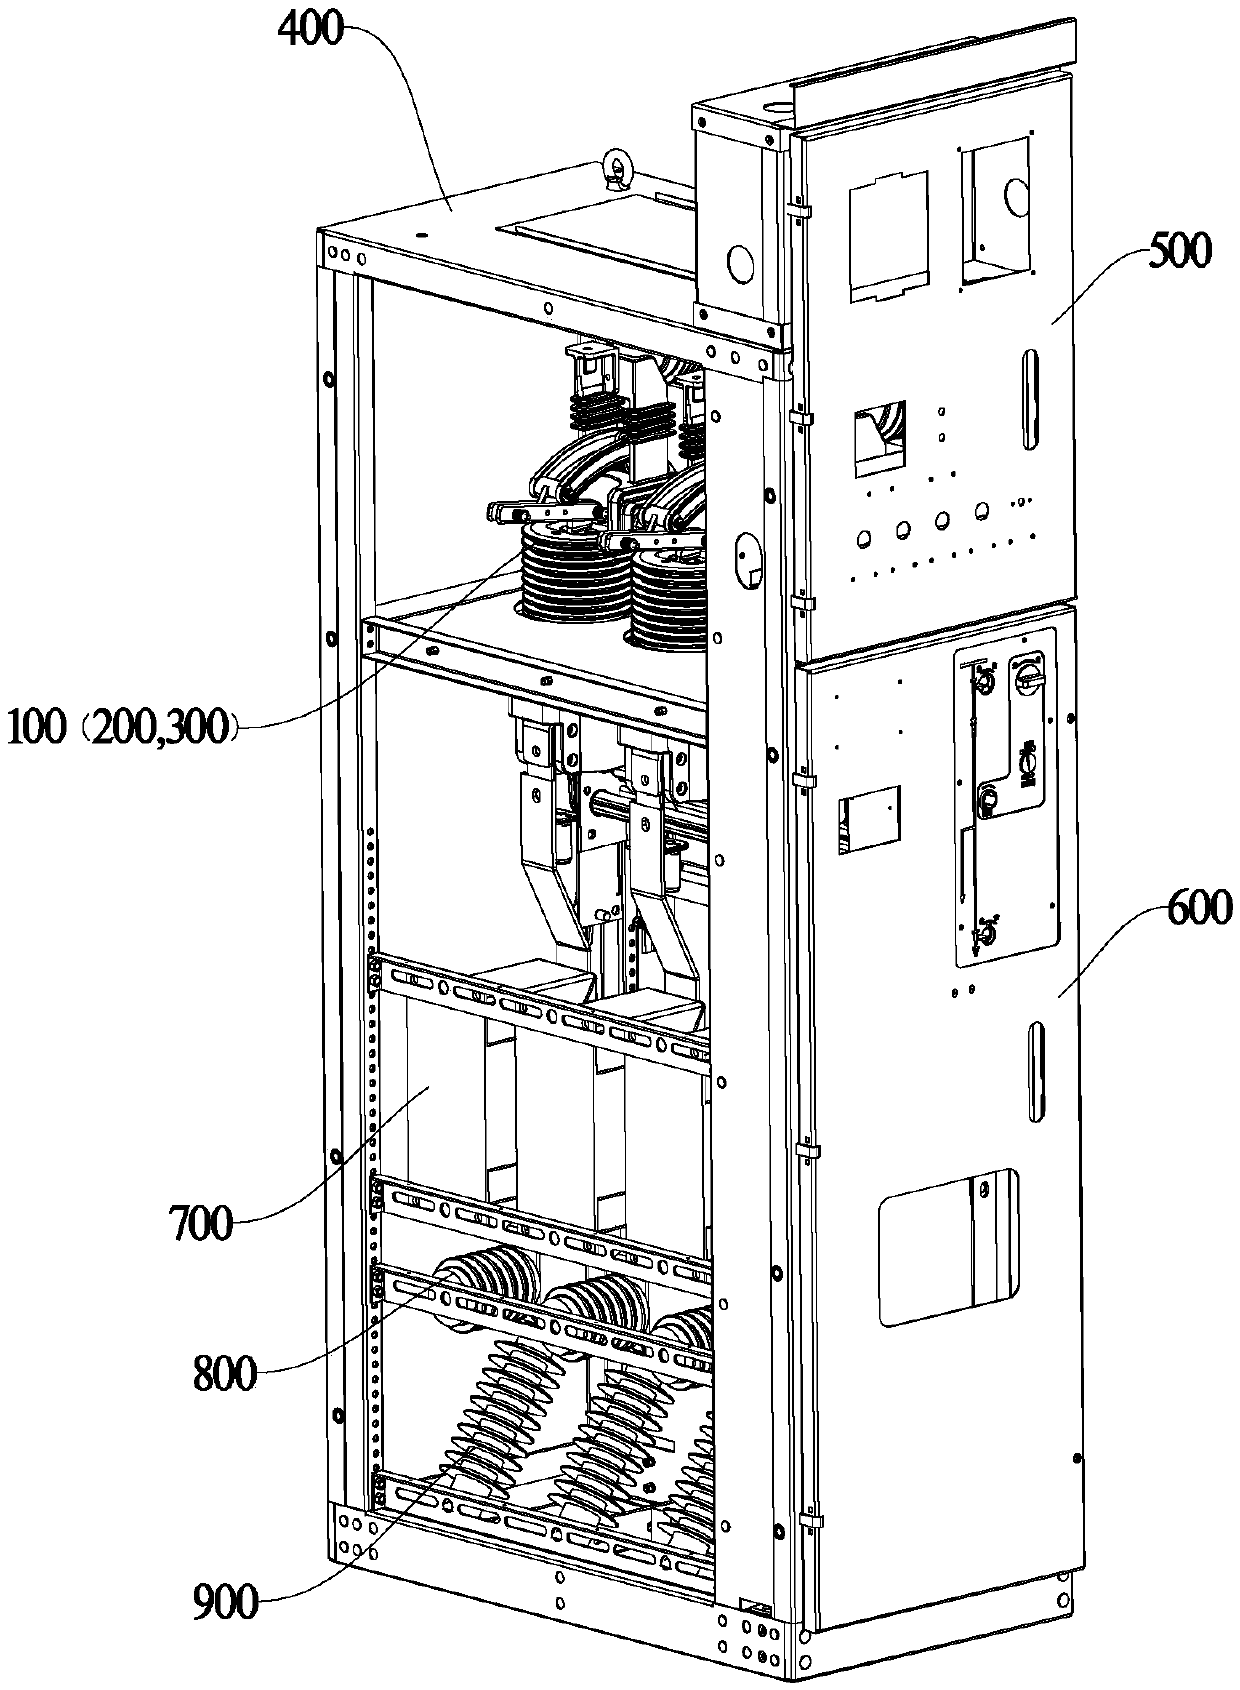 Integrated circuit breaker and switch cabinet